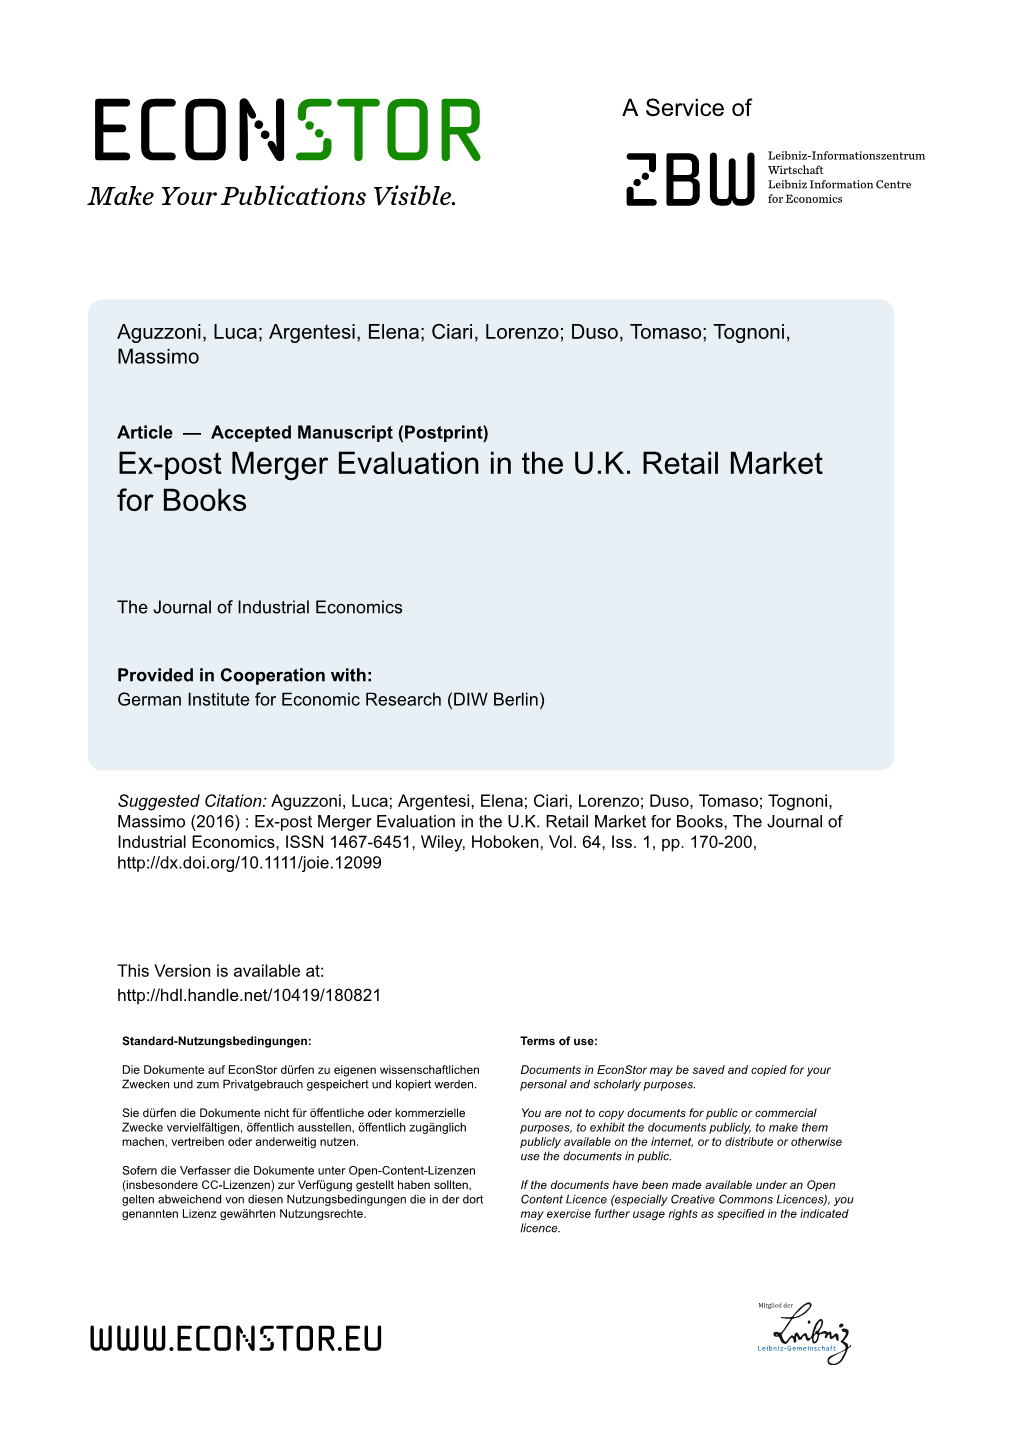 Online Appendixes Ex-Post Merger Evaluation in the UK Retail Market for Books